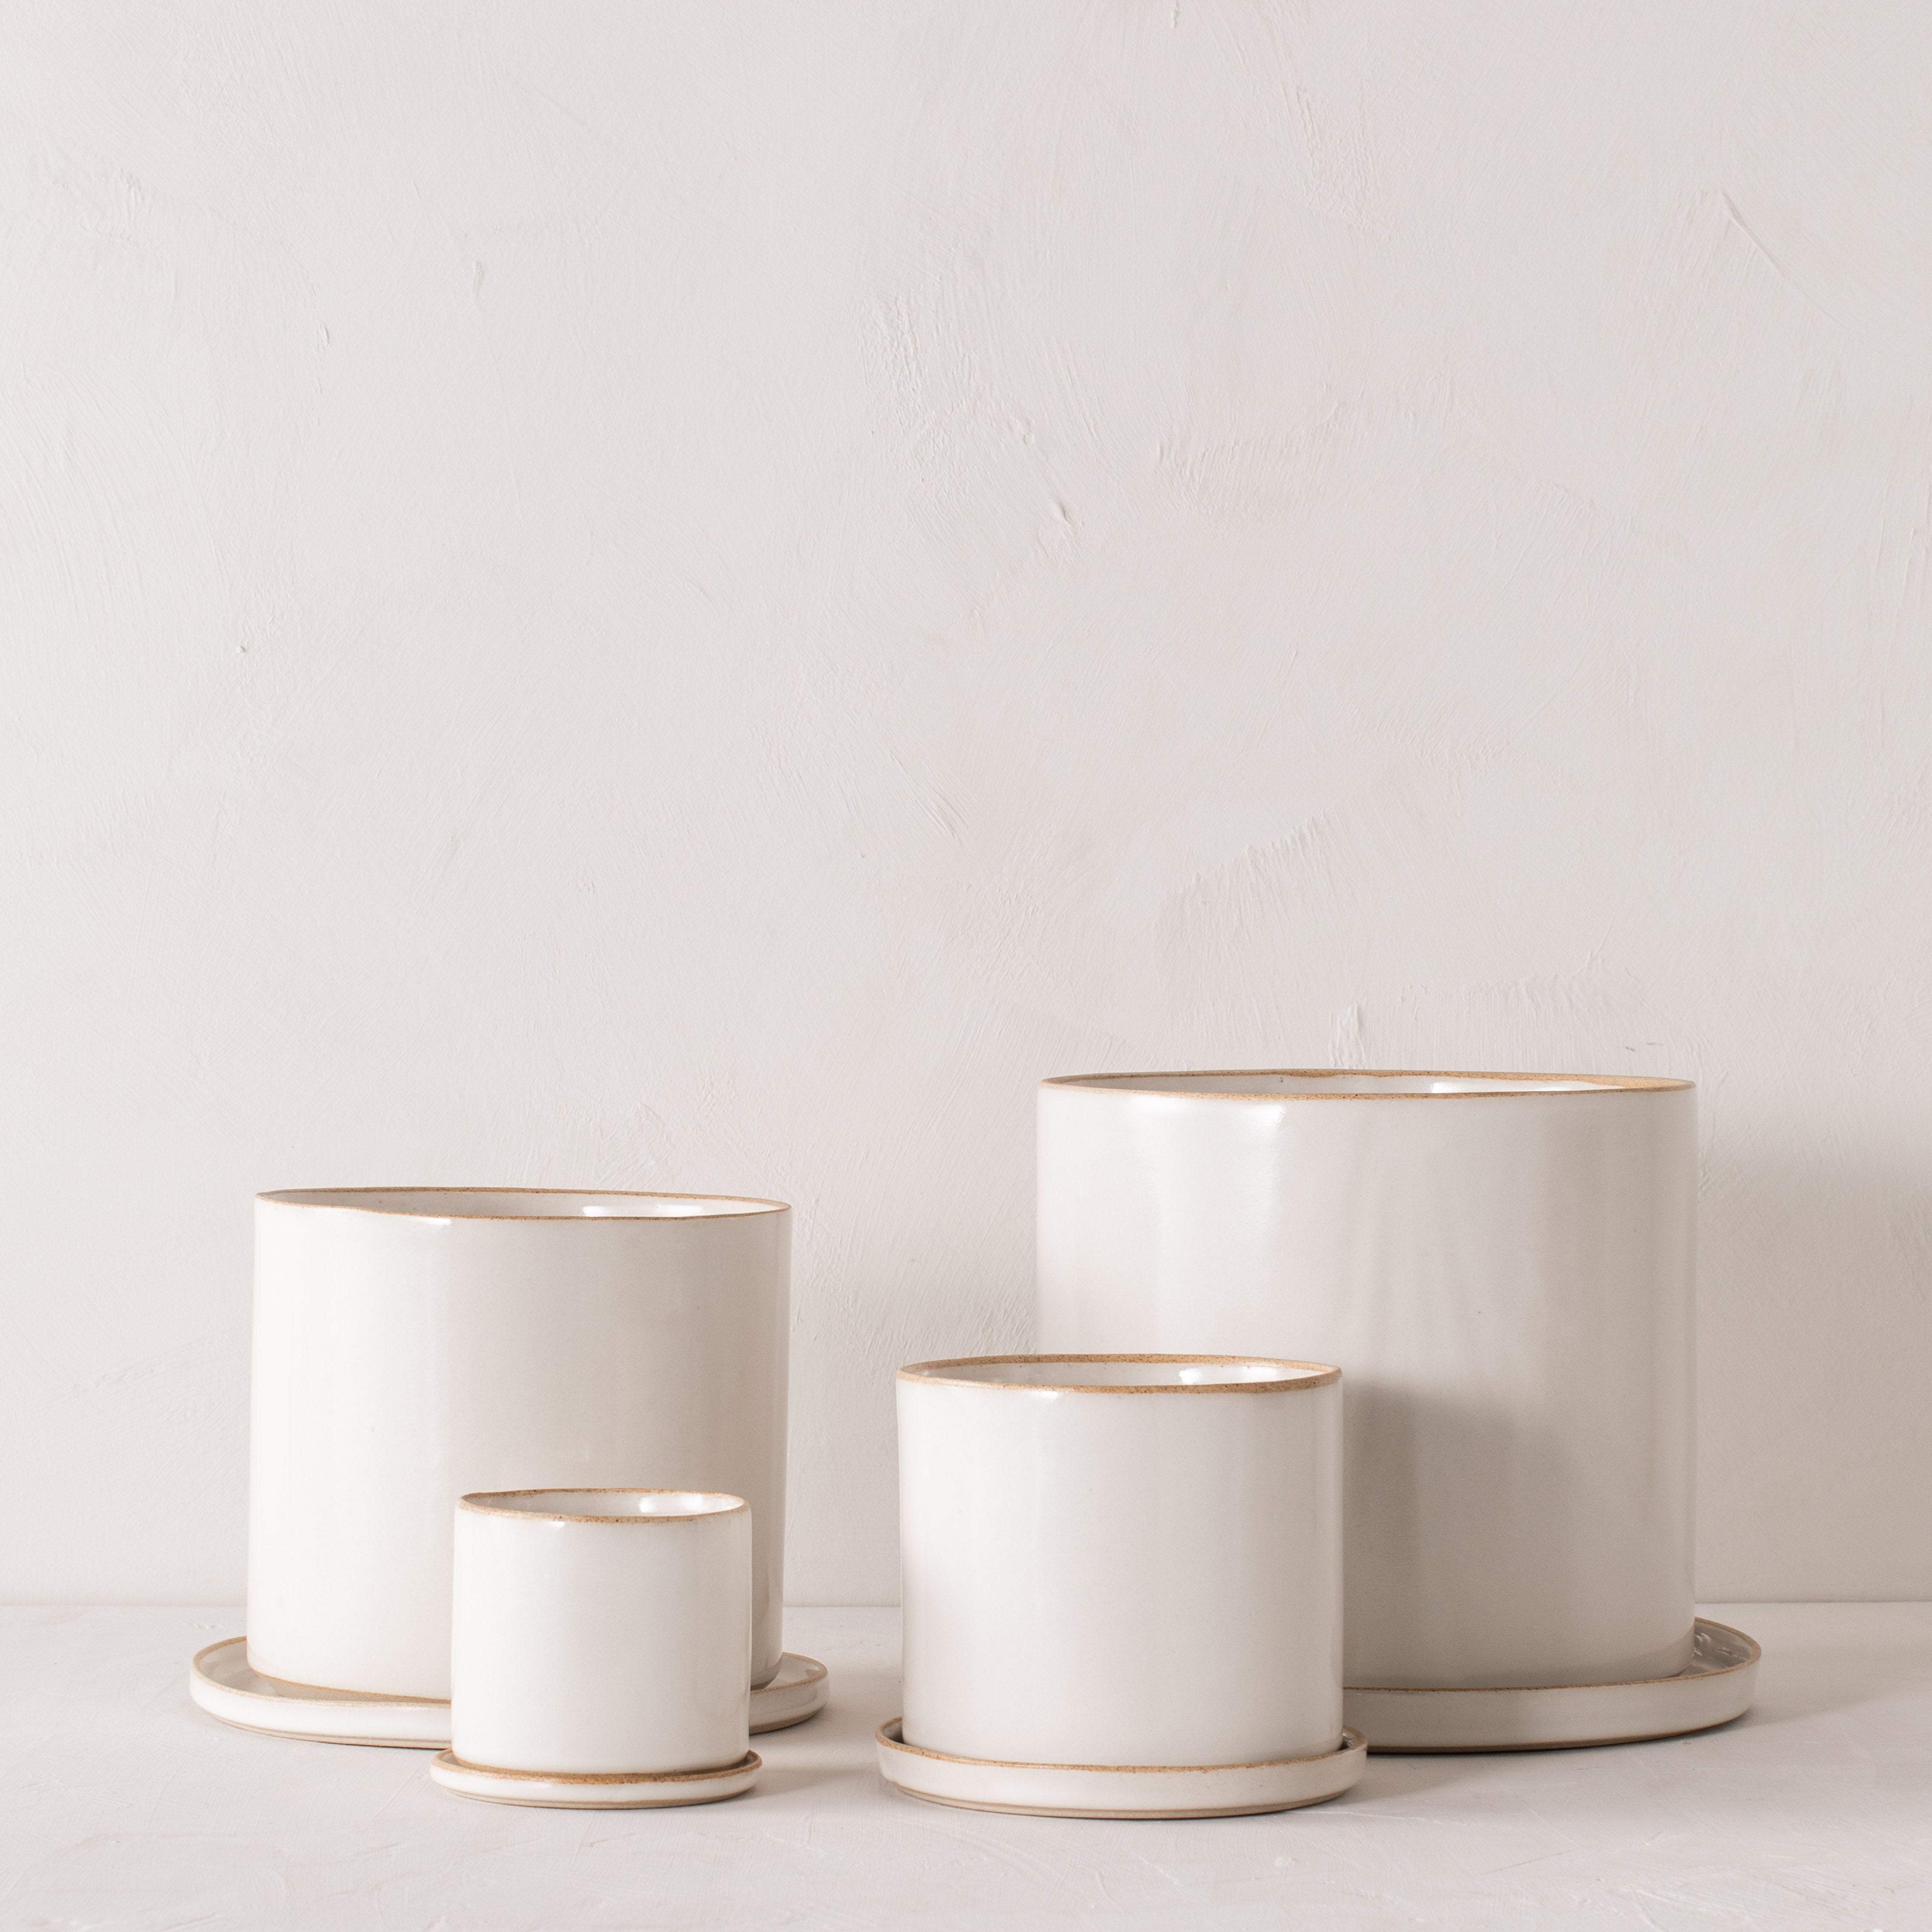 Four white ceramic planters with bottom drainage dishes, 4, 6, 8, and 10 inches. Staged on a white plaster textured tabletop against a plaster textured white wall. Designed by Convivial Production, sold by Shop Verdant. Kansas City, Mo plant store.